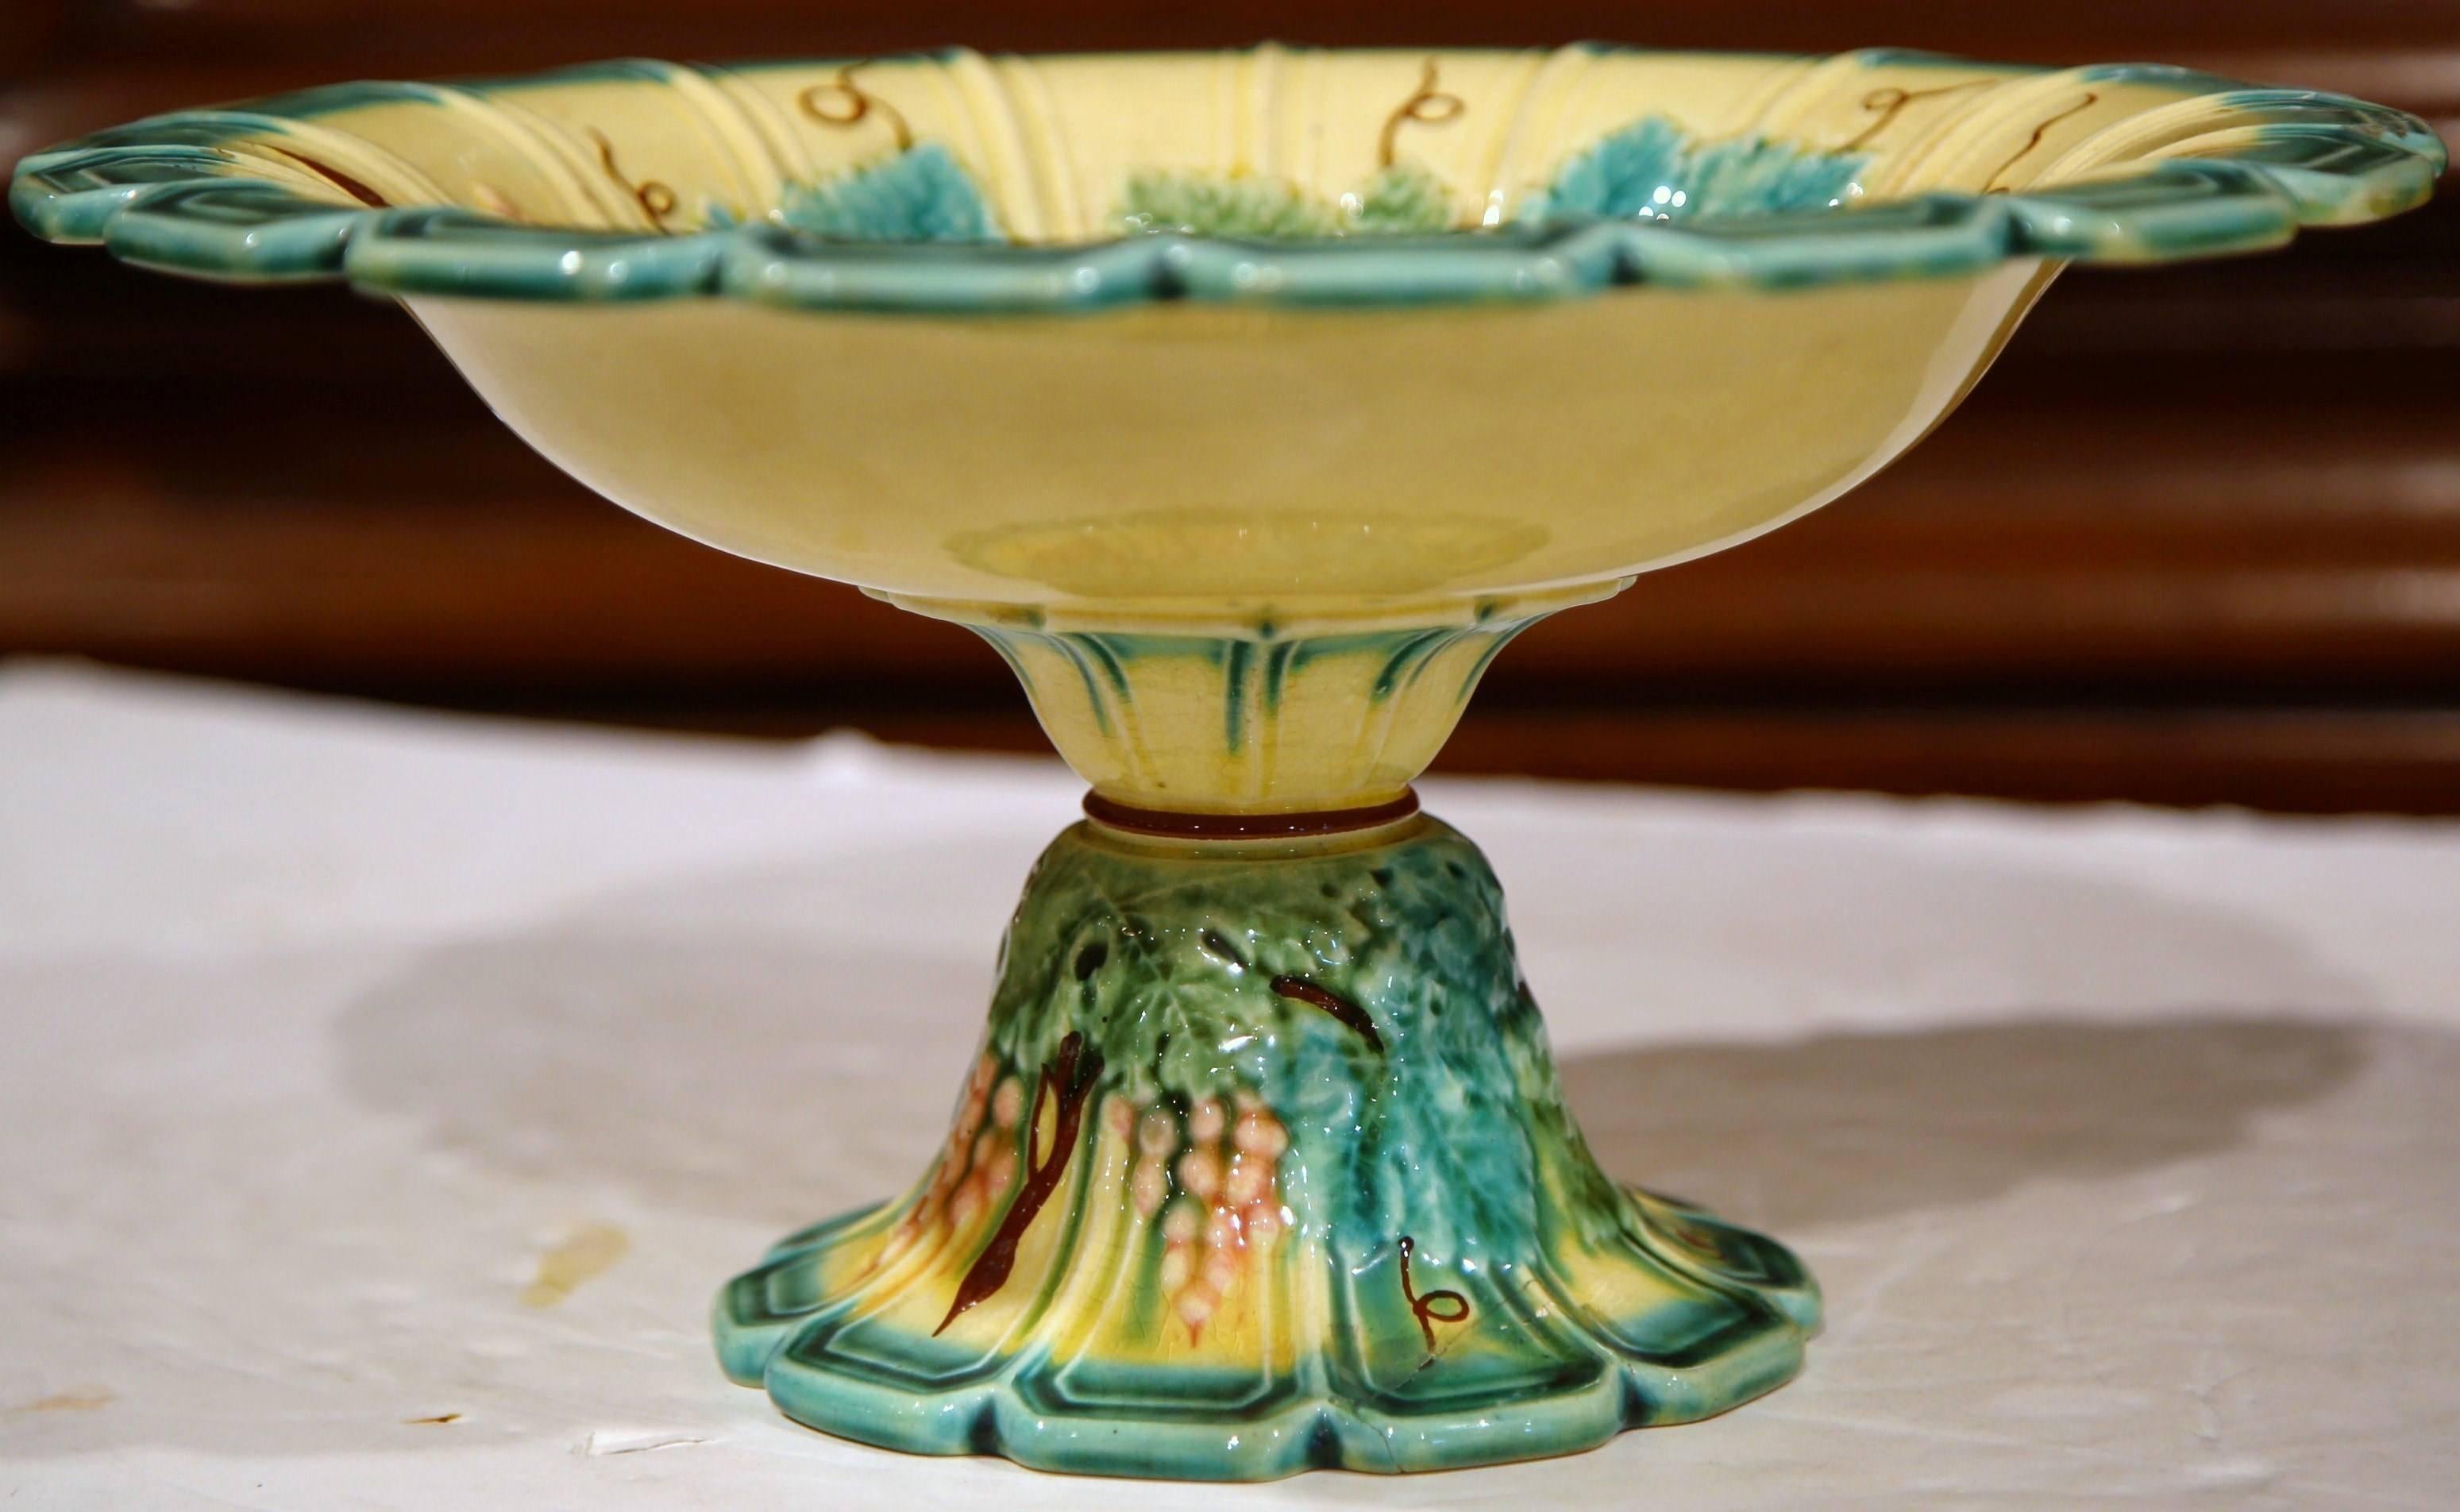 This beautiful, antique hand painted majolica centerpiece was sculpted in France, circa 1880. The blue, green and yellow dish features a wide cup with scalloped edges, resting on a tall carved round base. Both top and bottom are embellished with